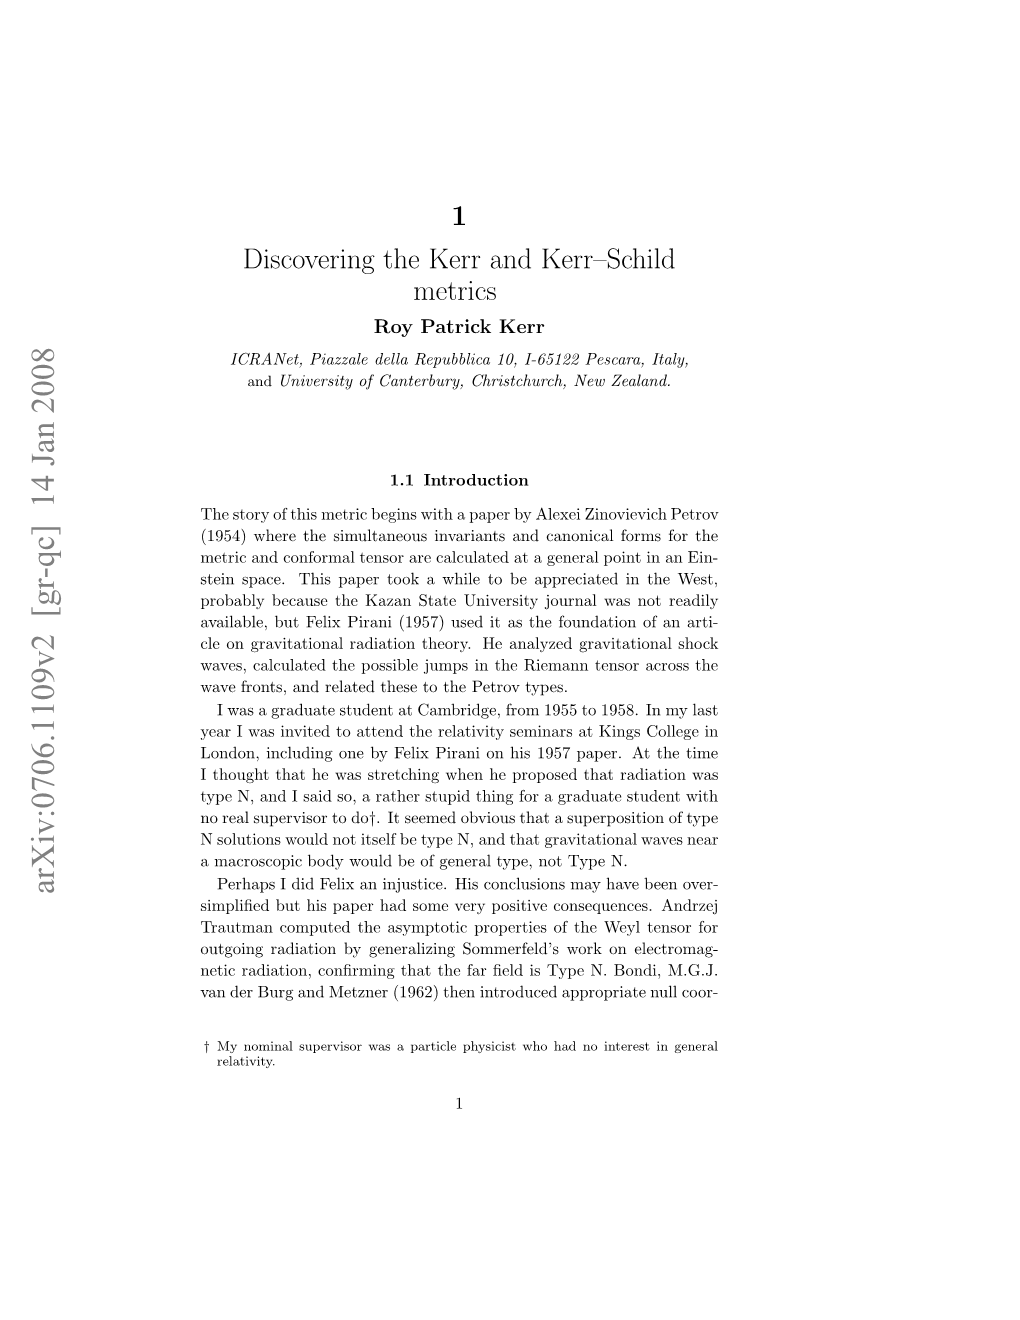 Discovering the Kerr and Kerr-Schild Metrics